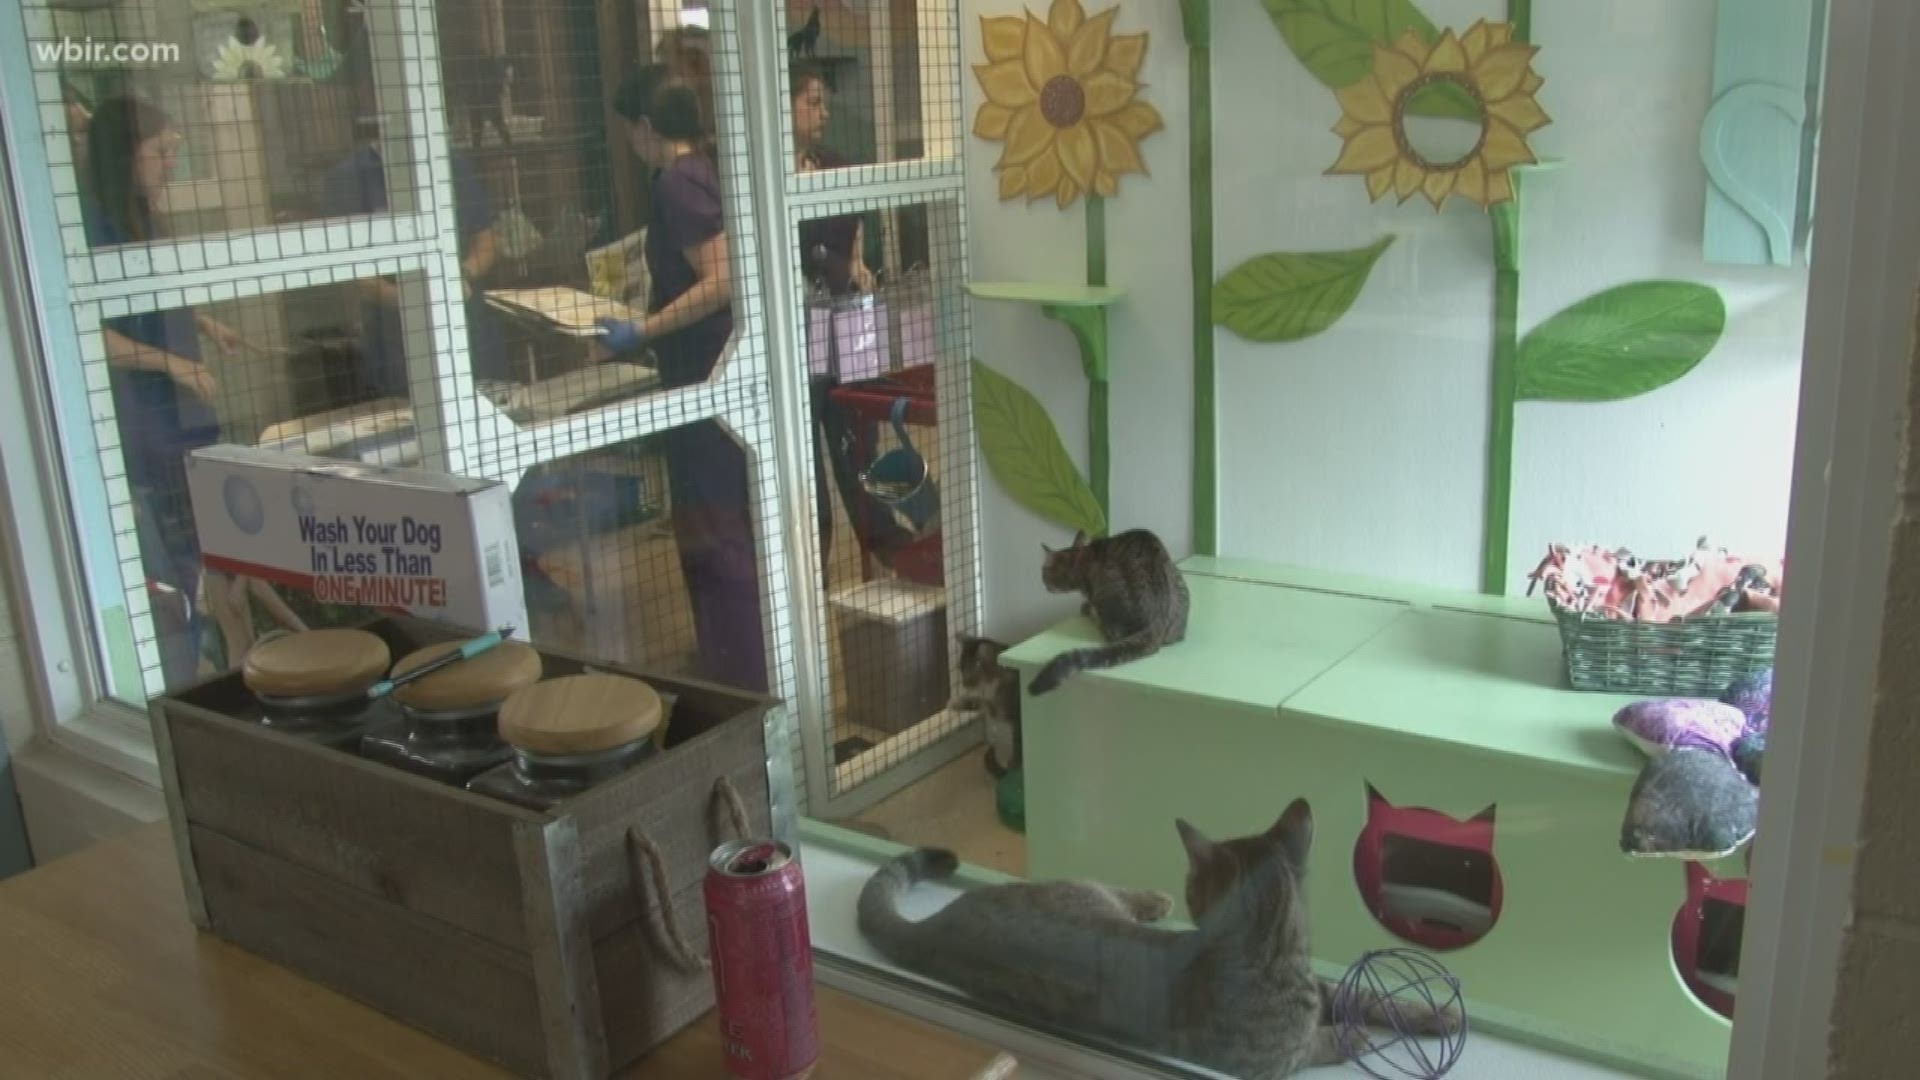 Volunteers are helping to spay and neuter dozens of cats seized in a Cocke County hoarding case.